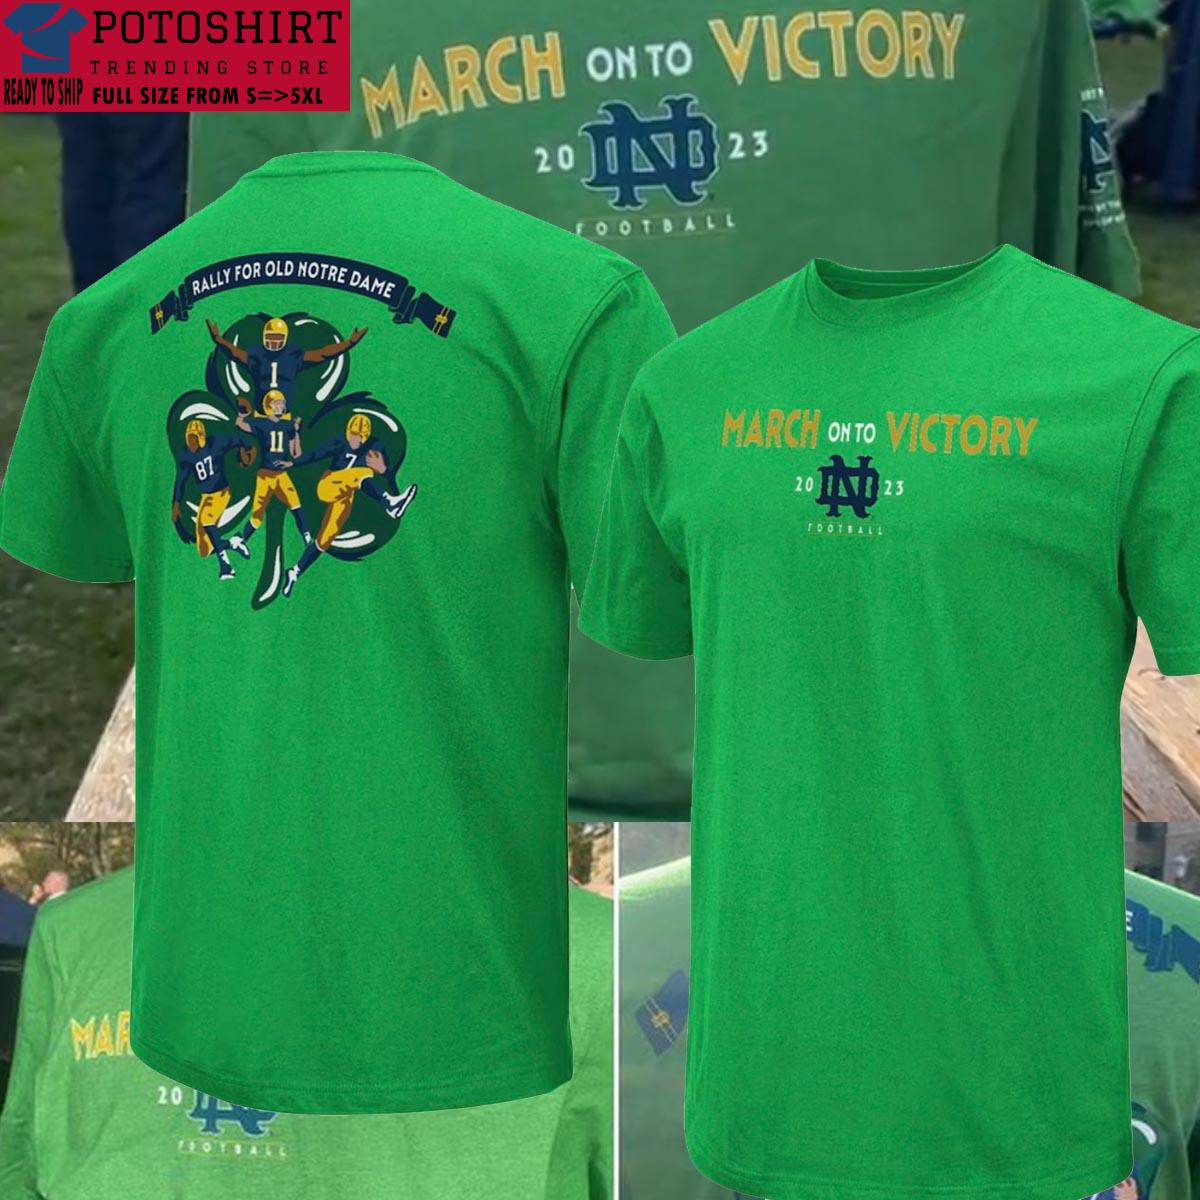 March On To Victory 2023 Rally For Old Notre Dame T Shirt qqqqqqqqq